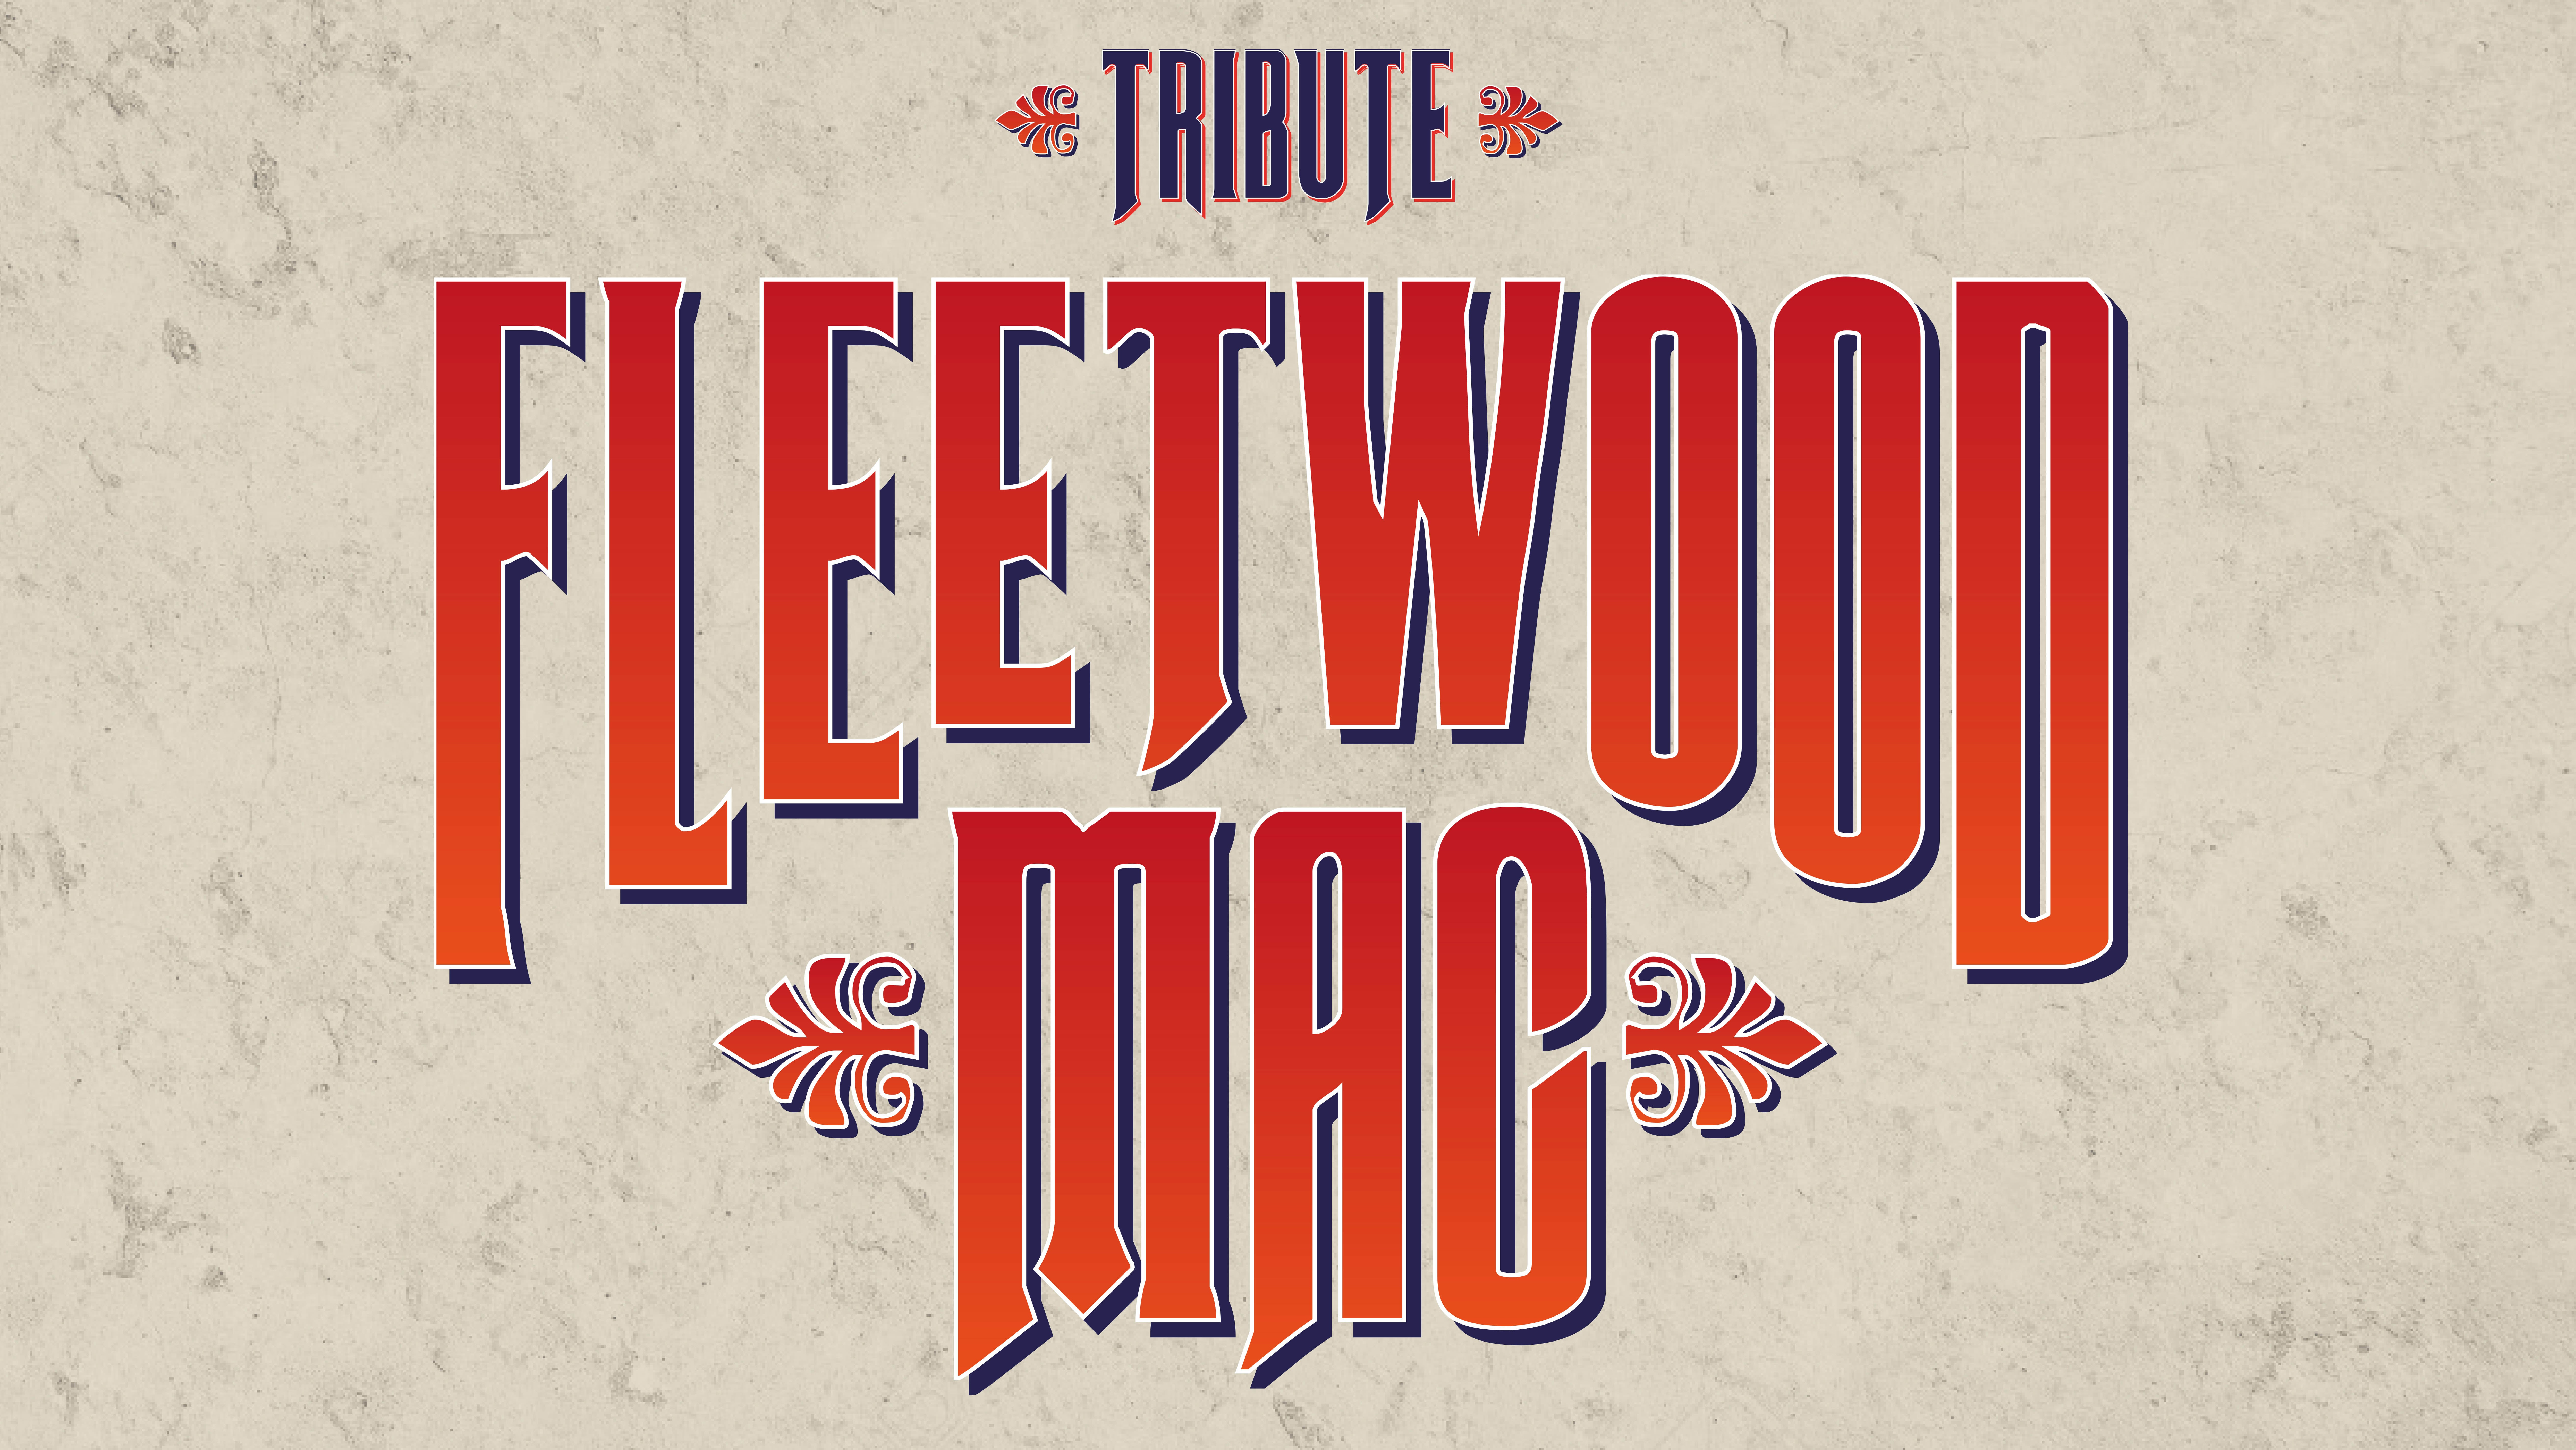 A Tribute To Fleetwood Mac By Mirage